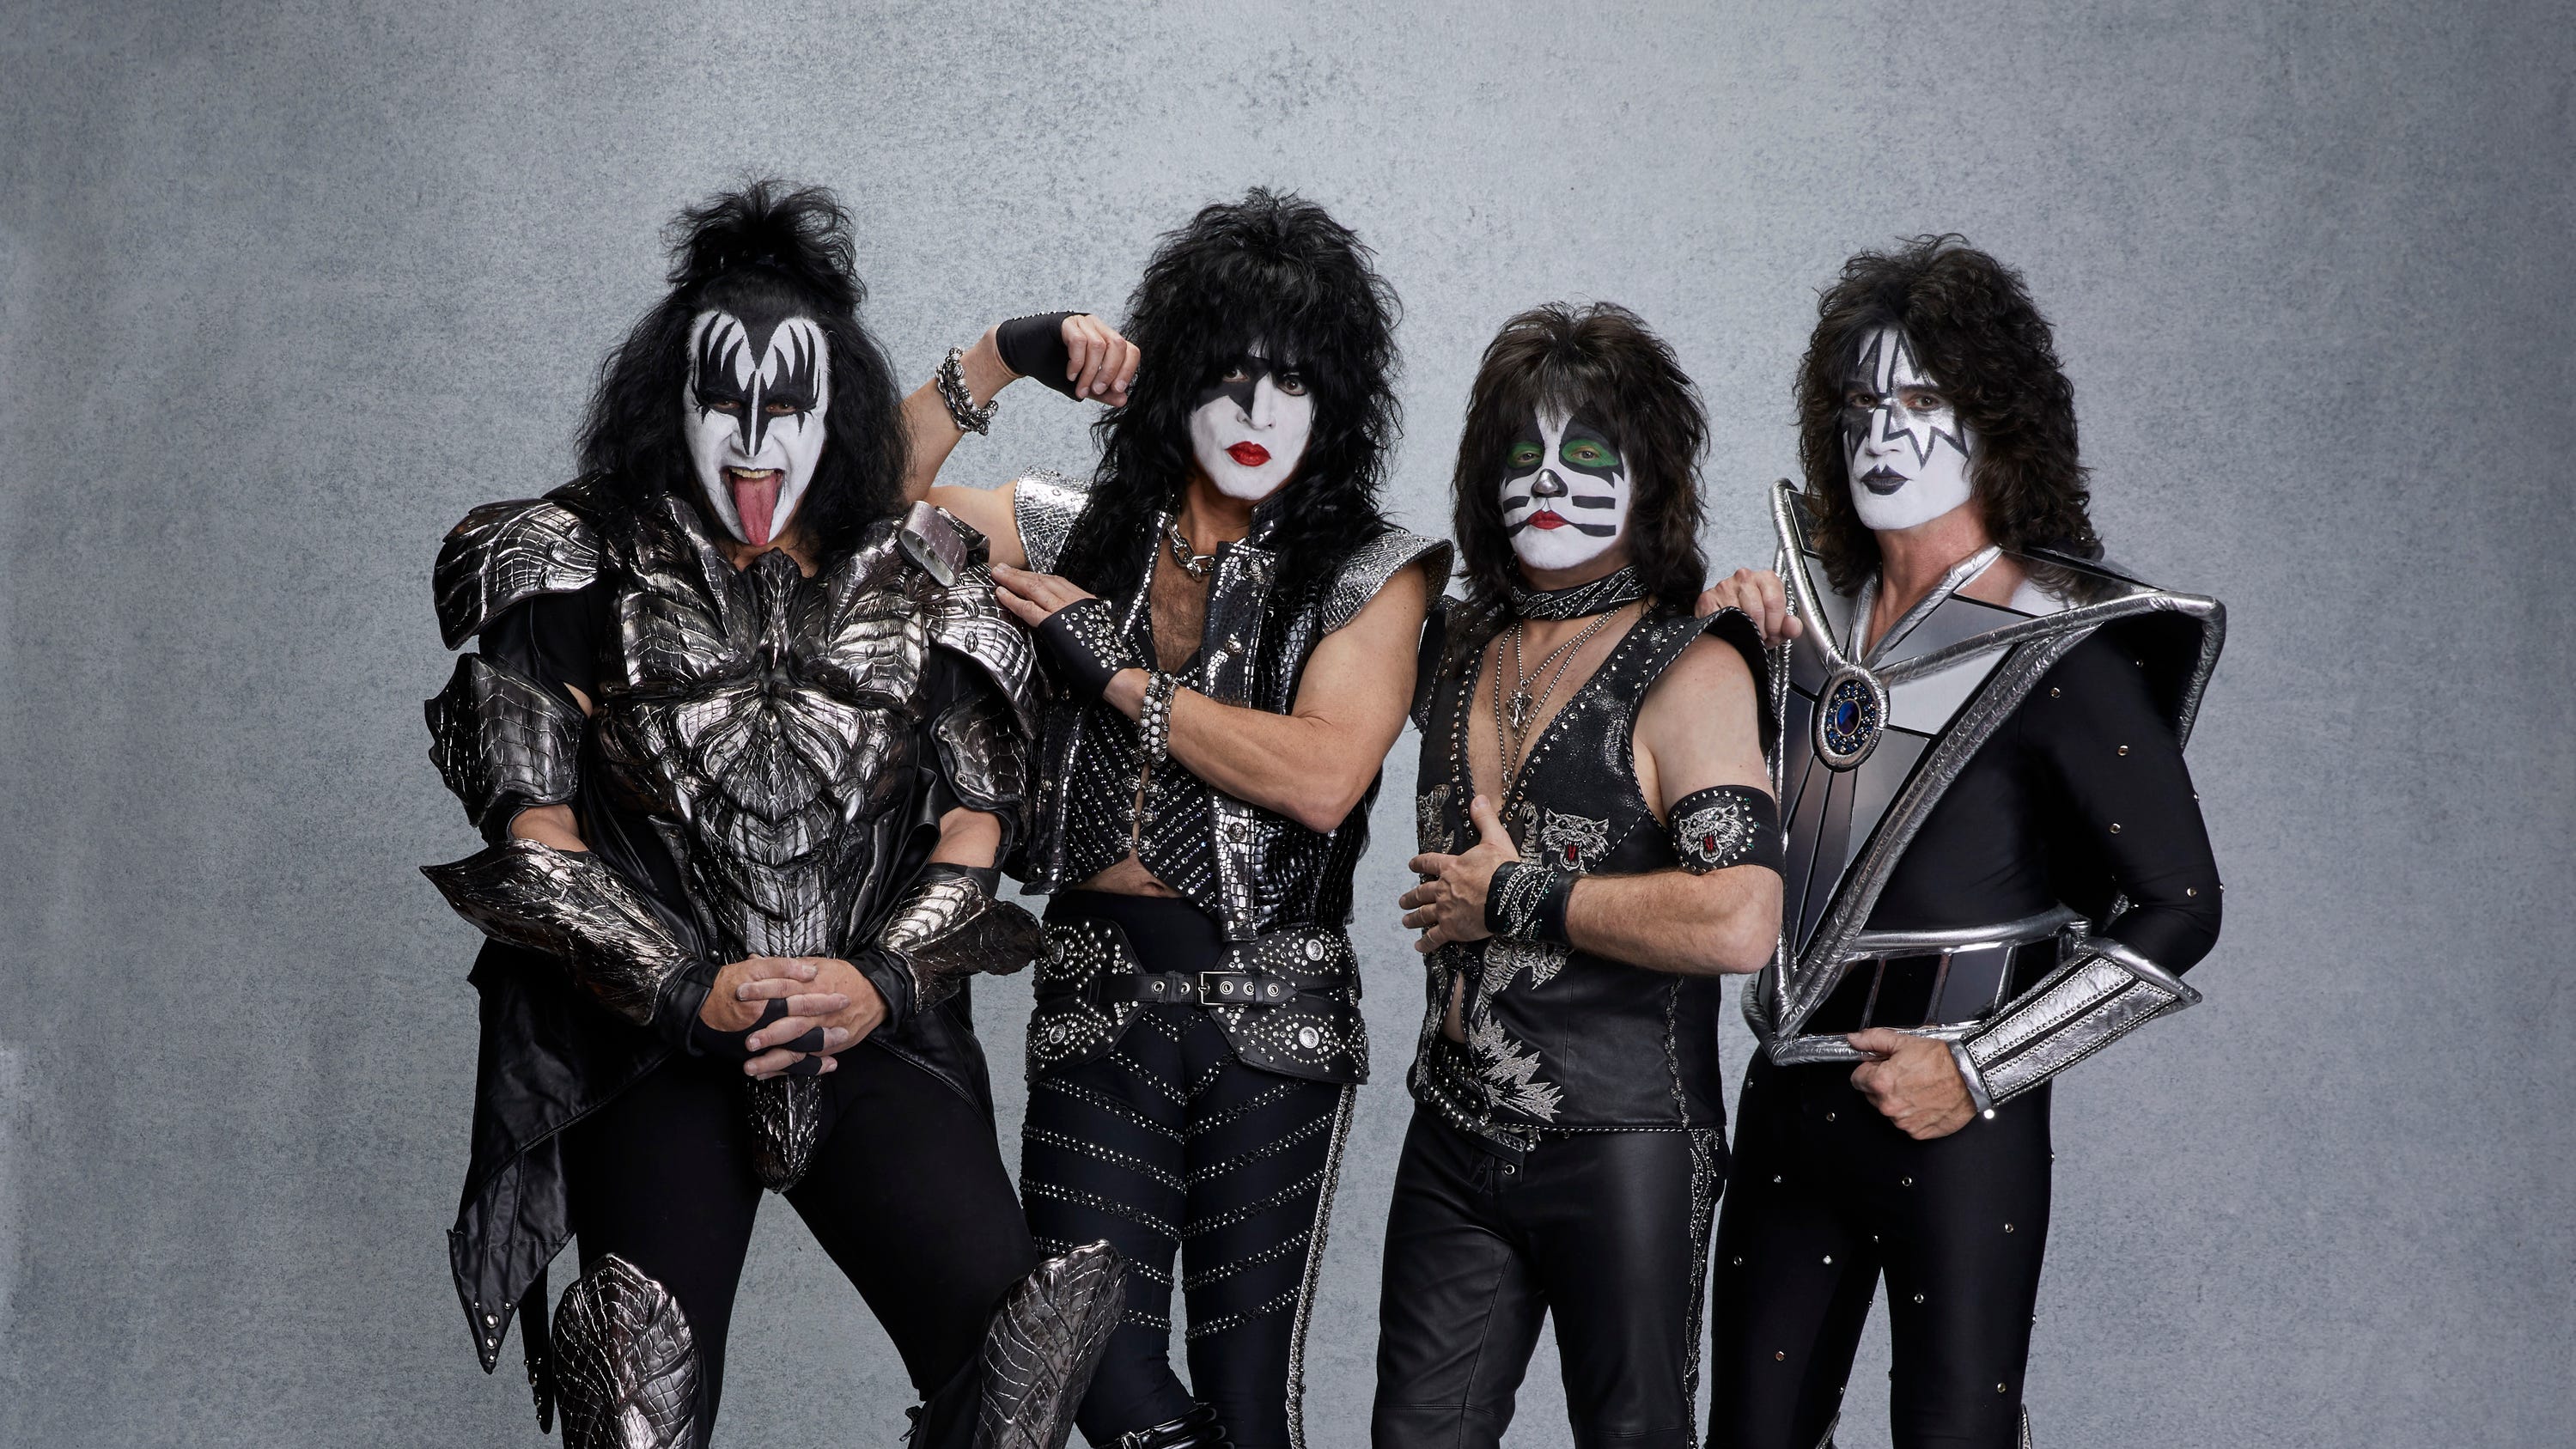 Kiss Bringing End Of The Road Tour To Xfinity Center In Mansfield